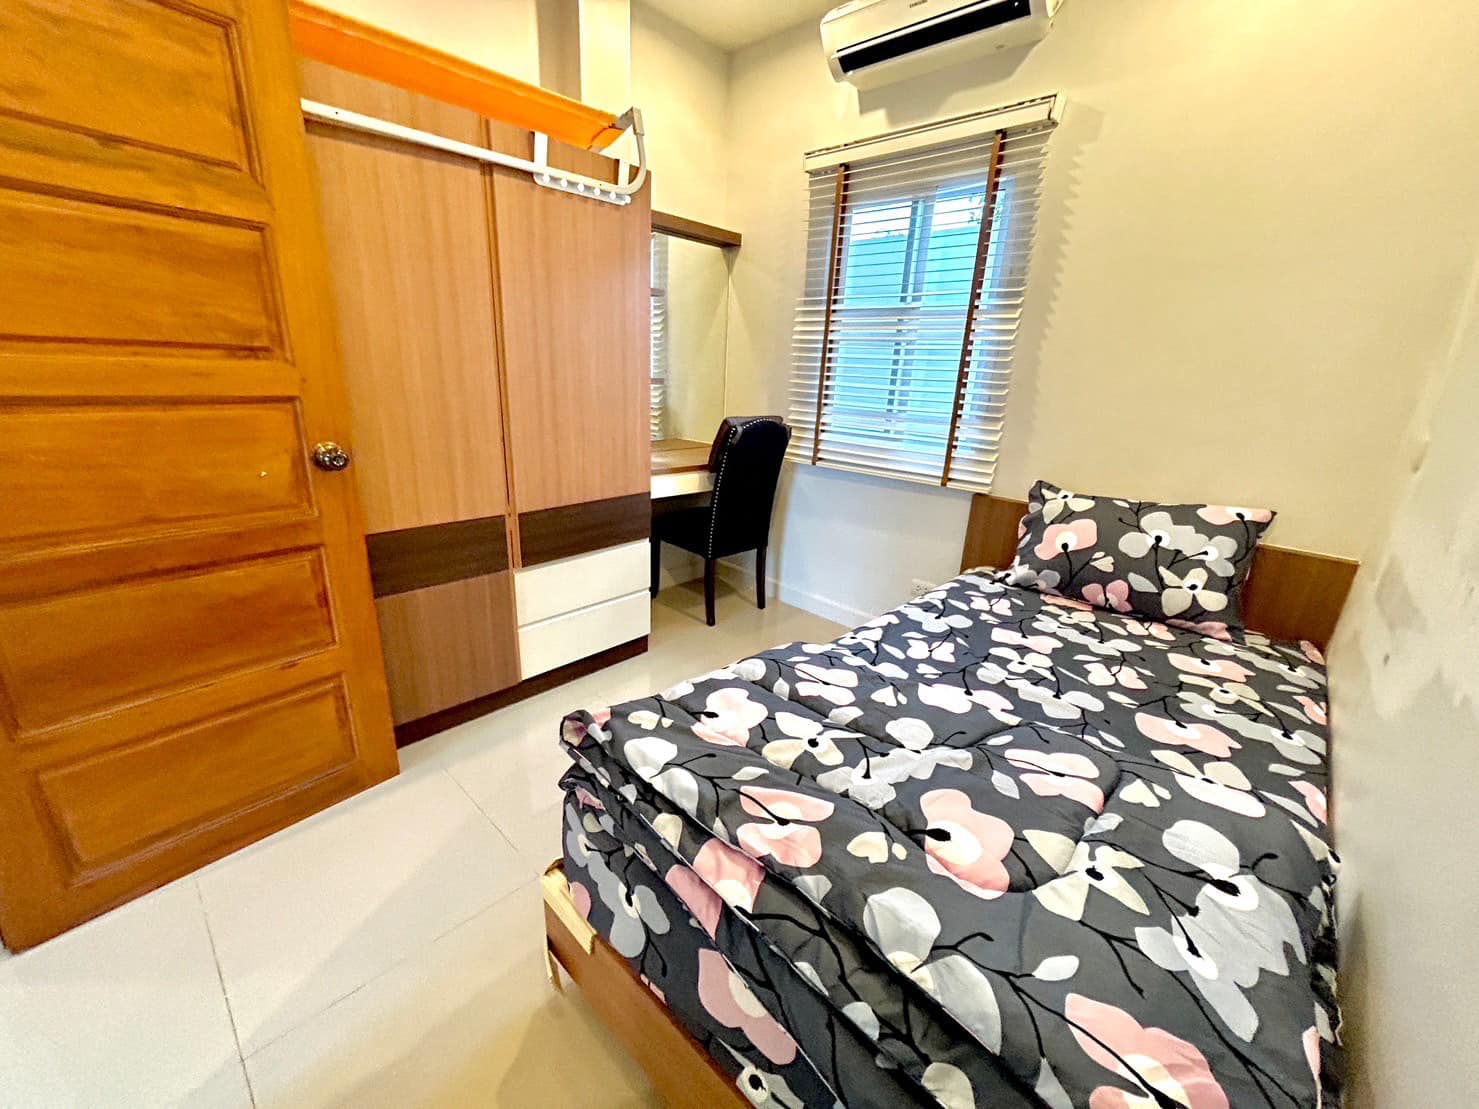 The Bliss 2 Village. 3 bedrooms Pool House in Huai Yai area